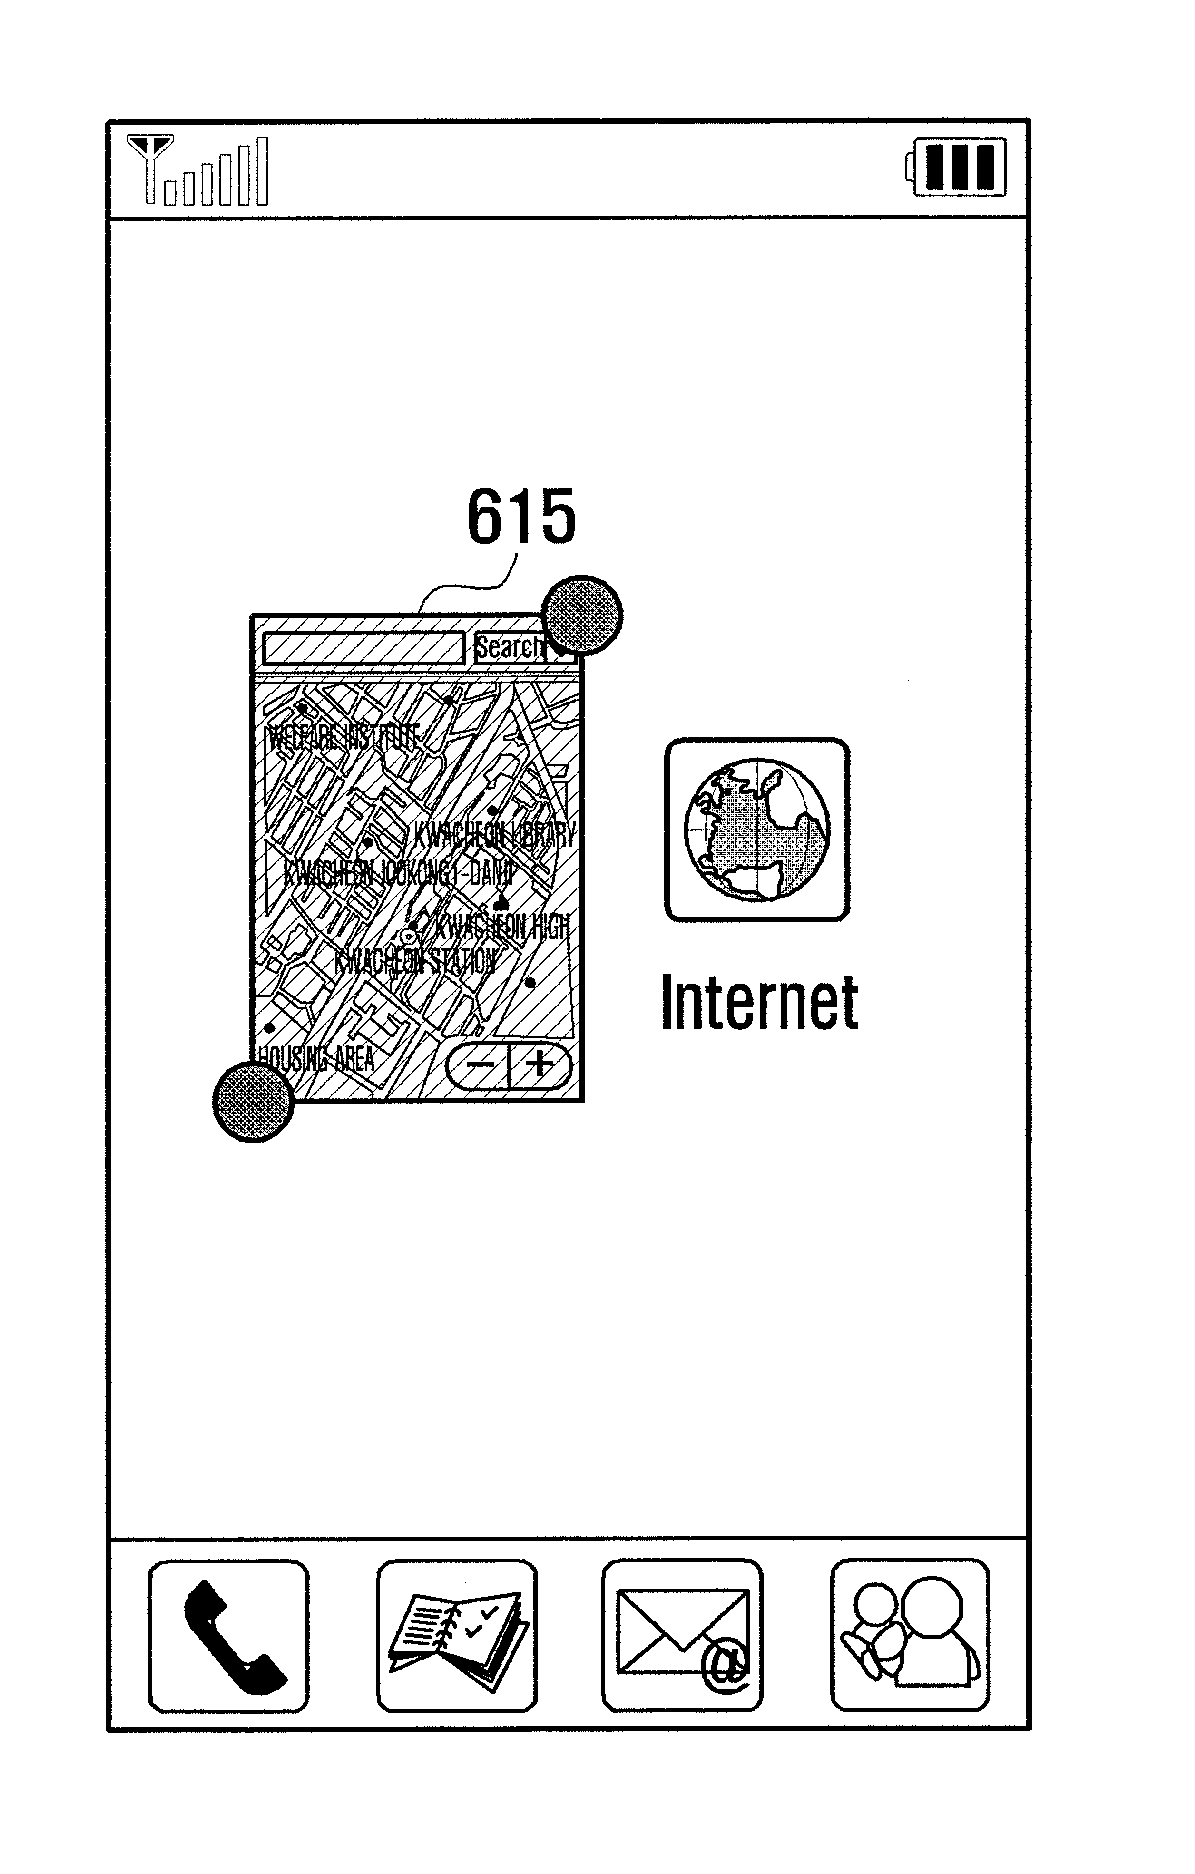 Method and terminal for executing application using touchscreen